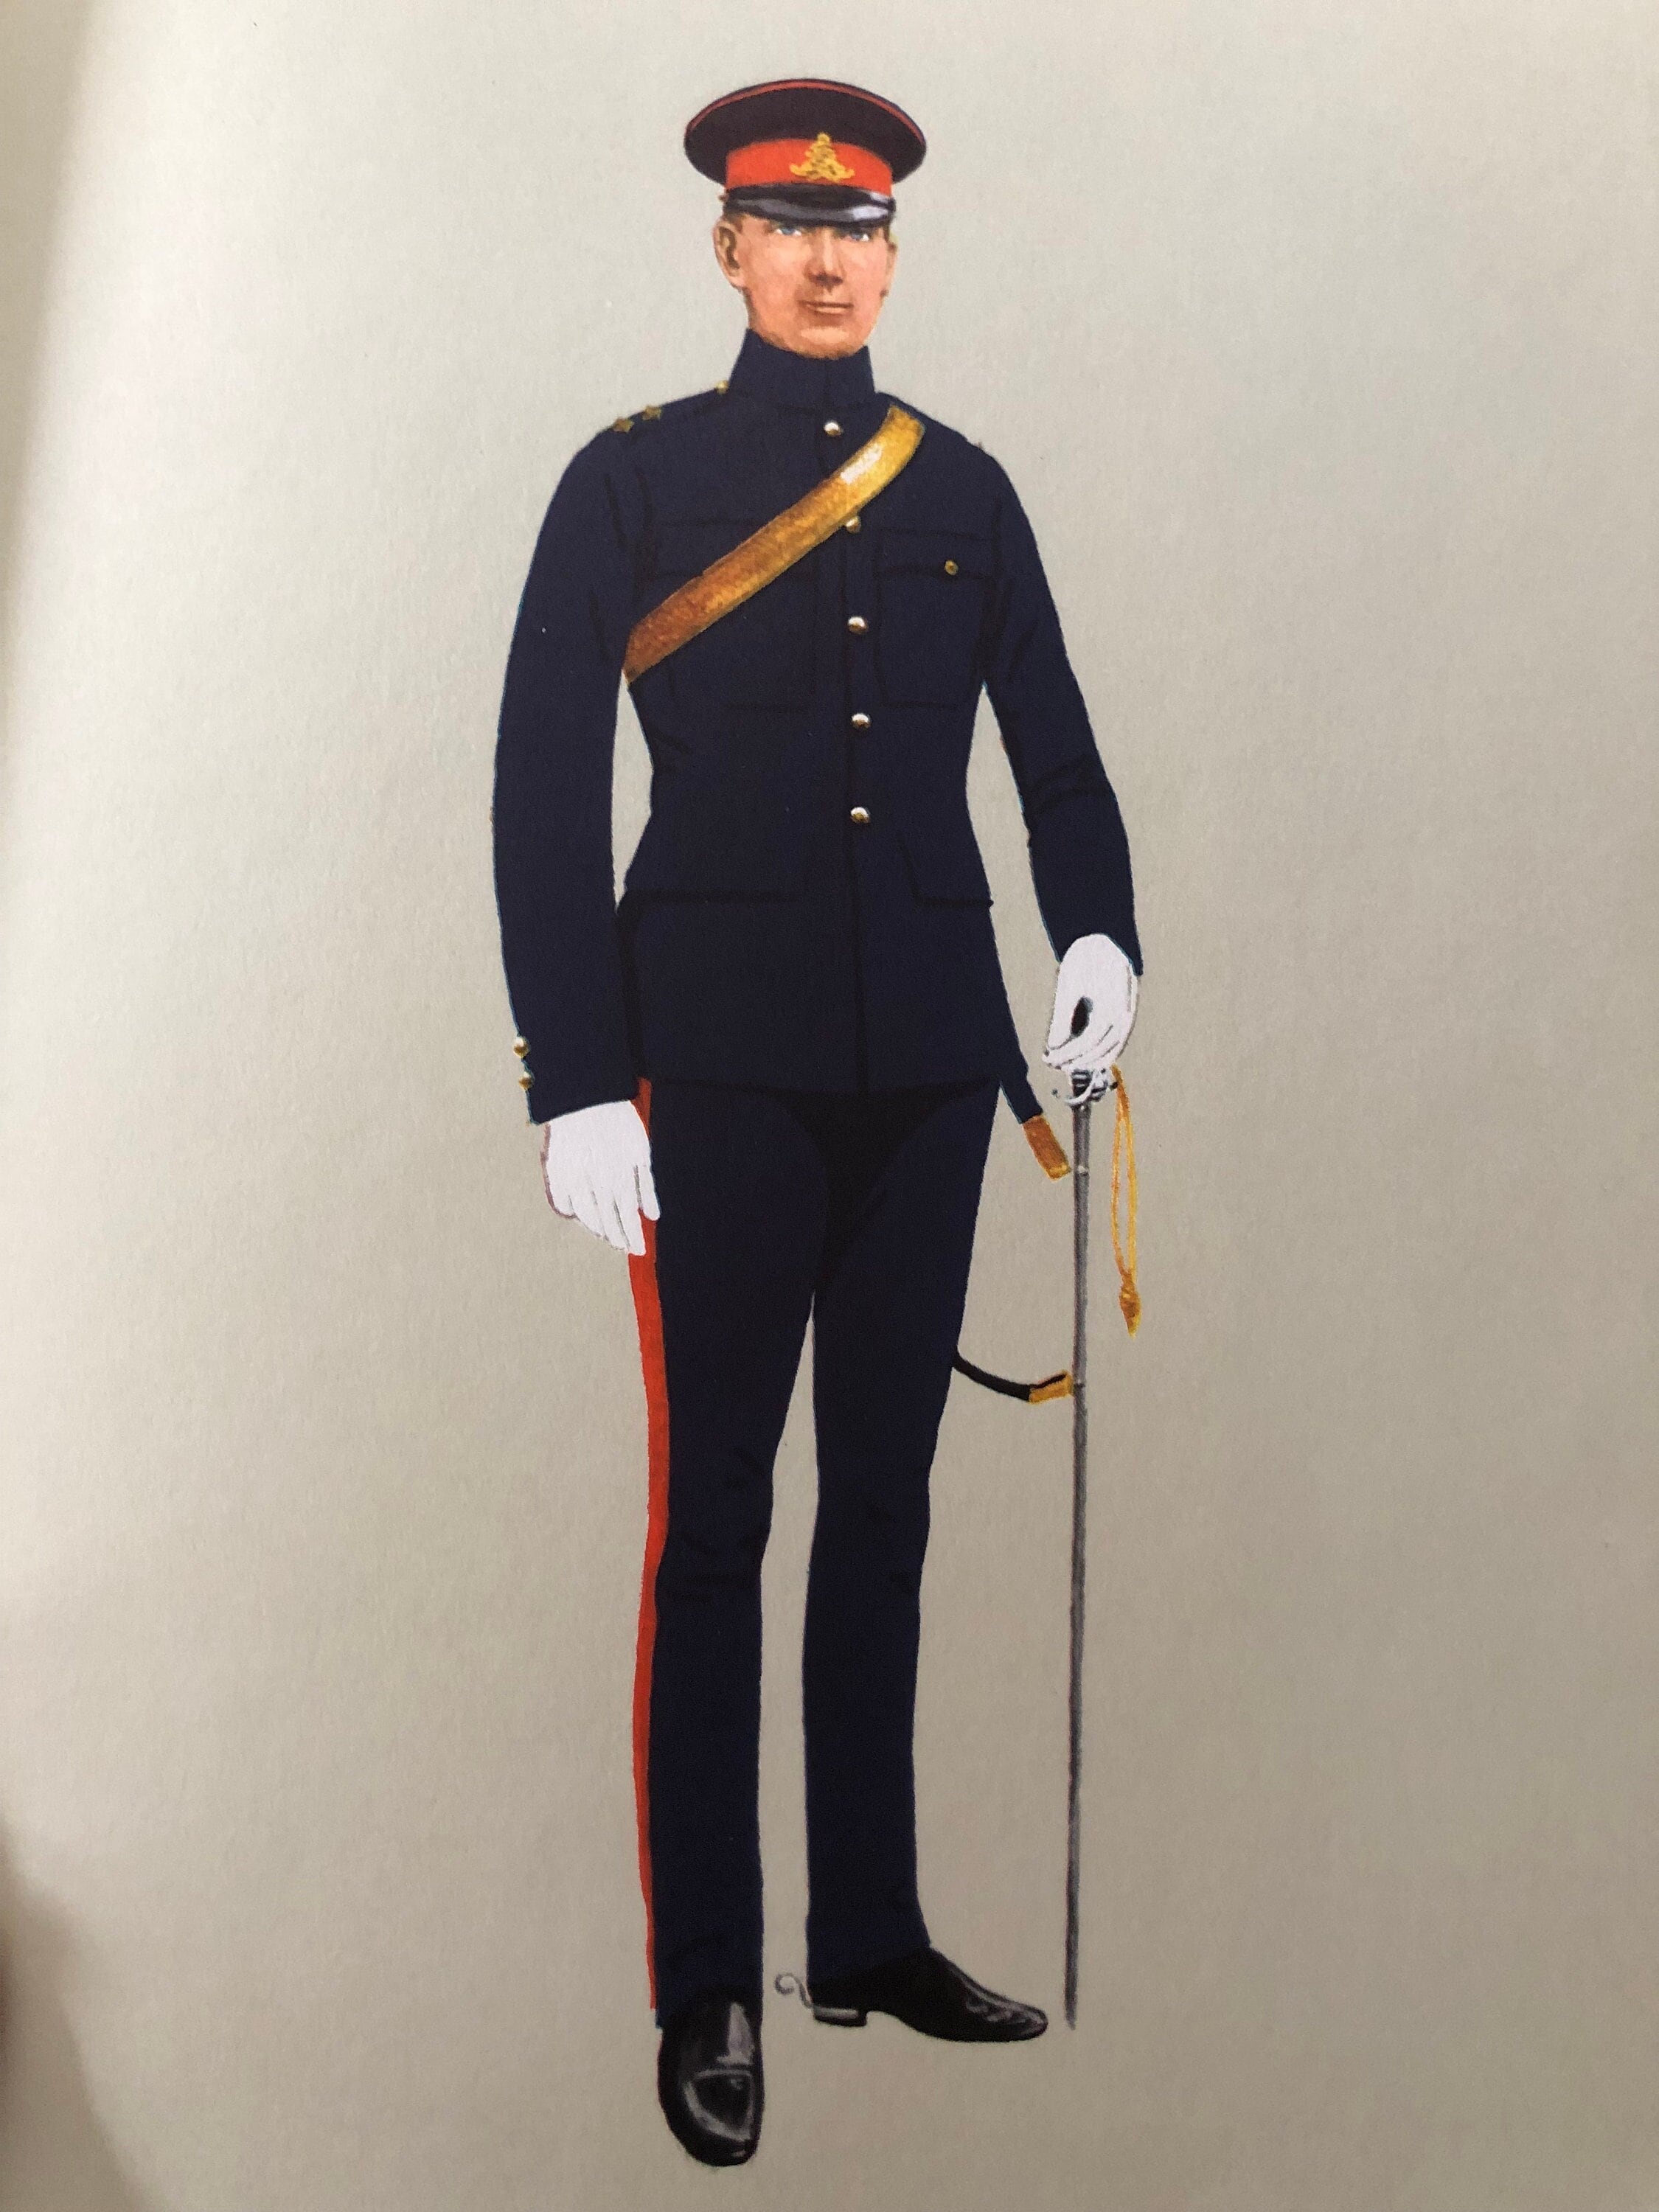 Modern Officer 1965 Royal Artillery British Uniforms 15x11 inch Color  published lithograph English Military History